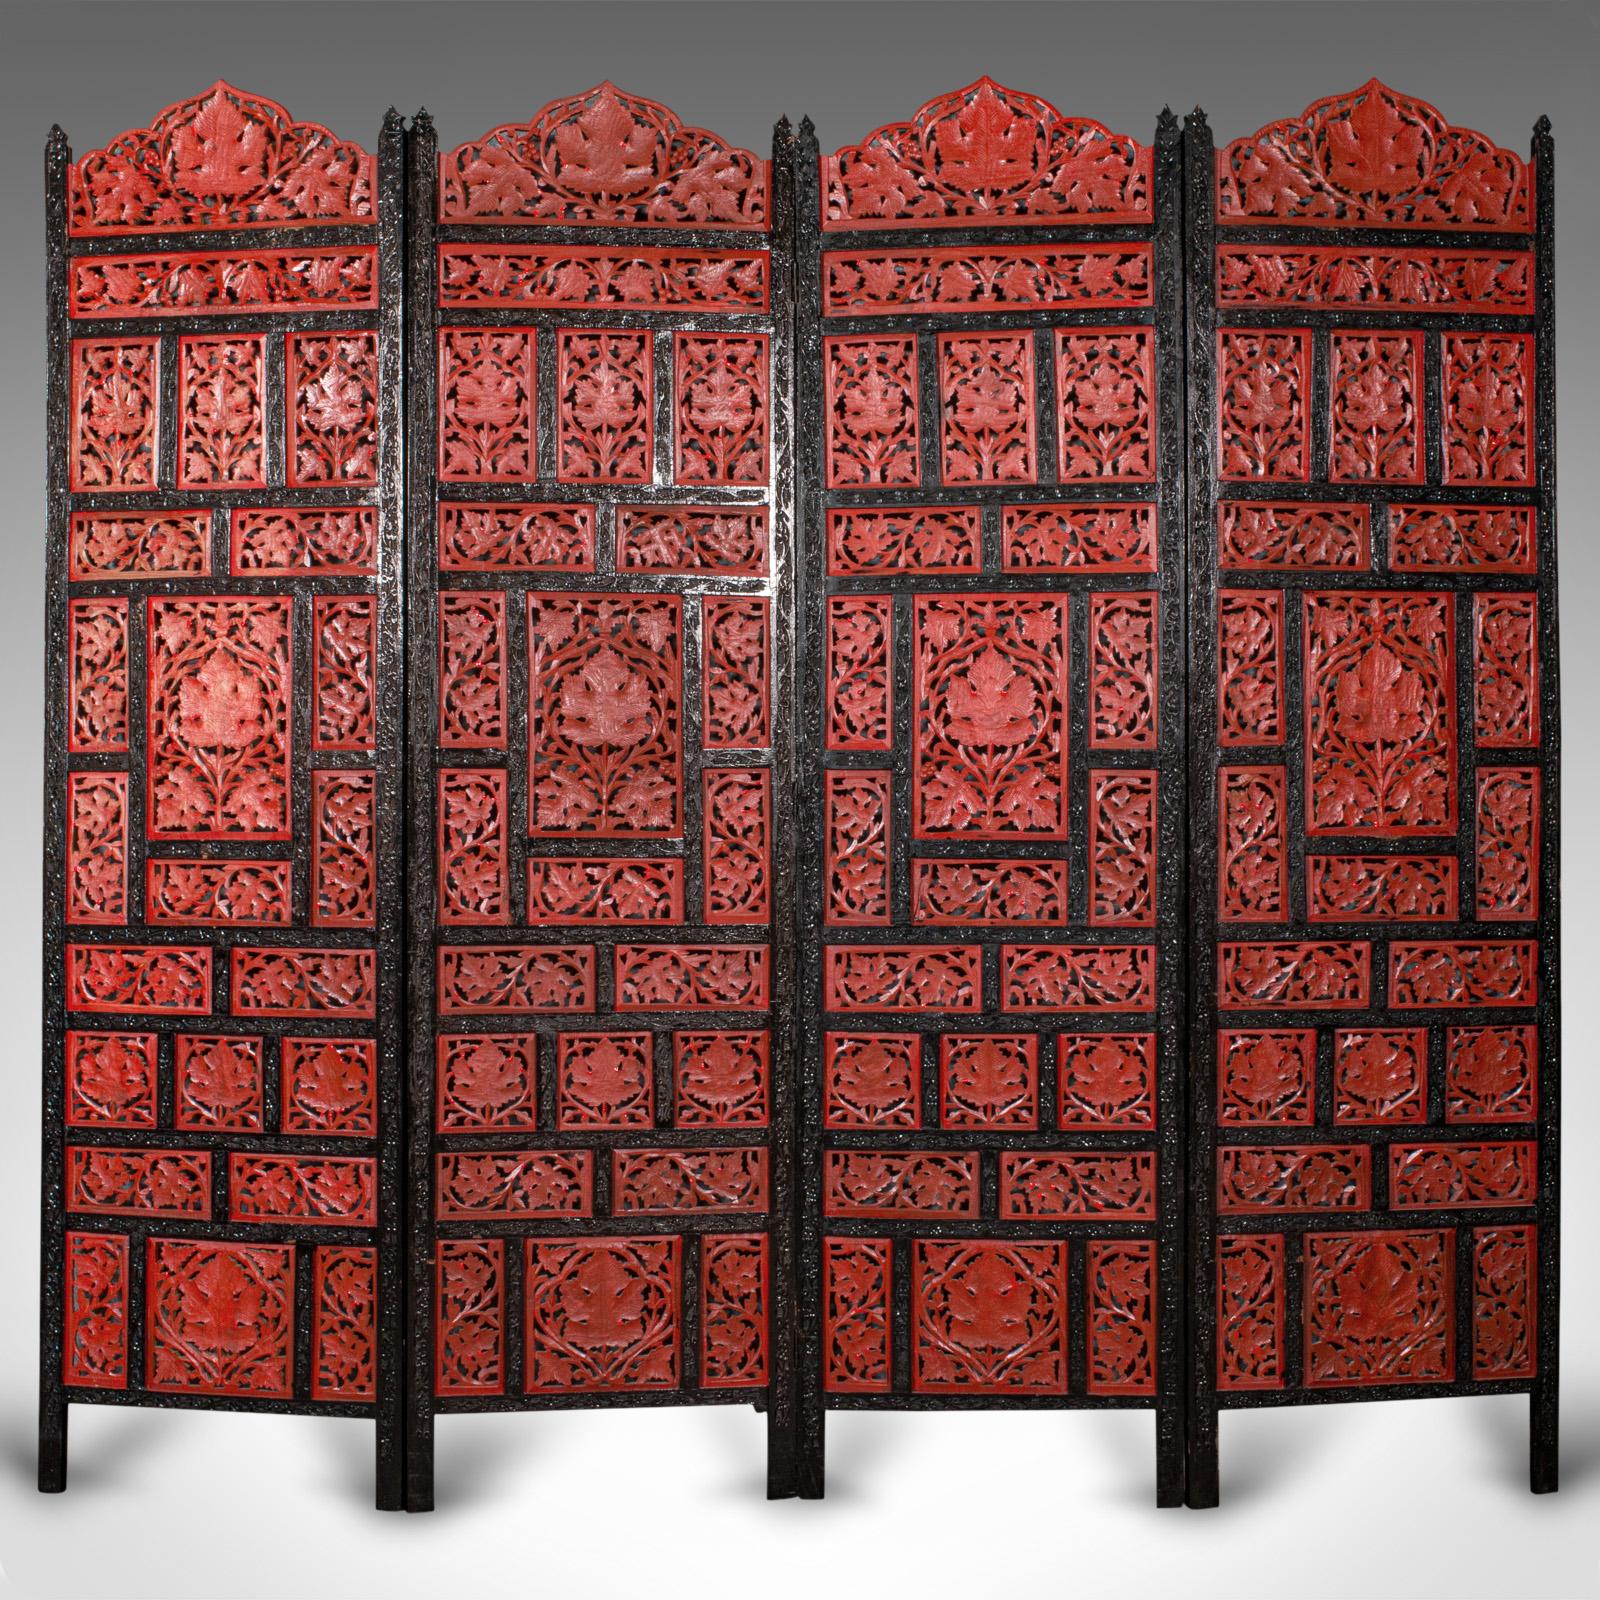 This is a vintage carved privacy screen. A Chinese, painted mahogany four panel room divider, dating to the late Art Deco period, circa 1940.
 
Profusely hand-carved privacy screen with striking red and black hues
Displays a desirable aged patina